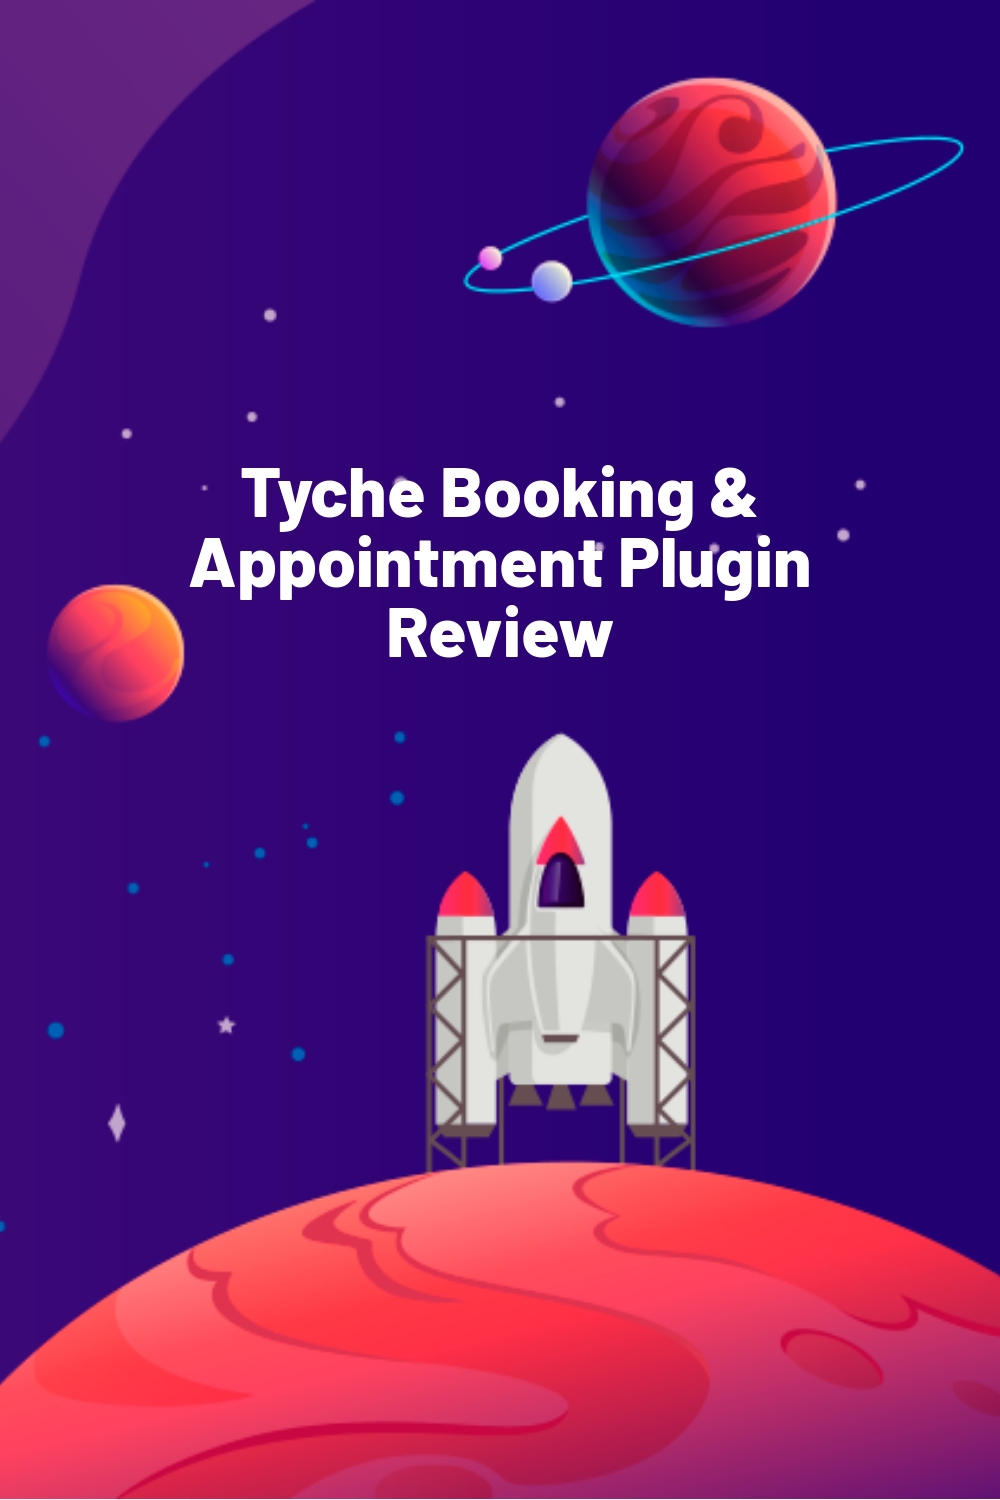 Tyche Booking & Appointment Plugin Review